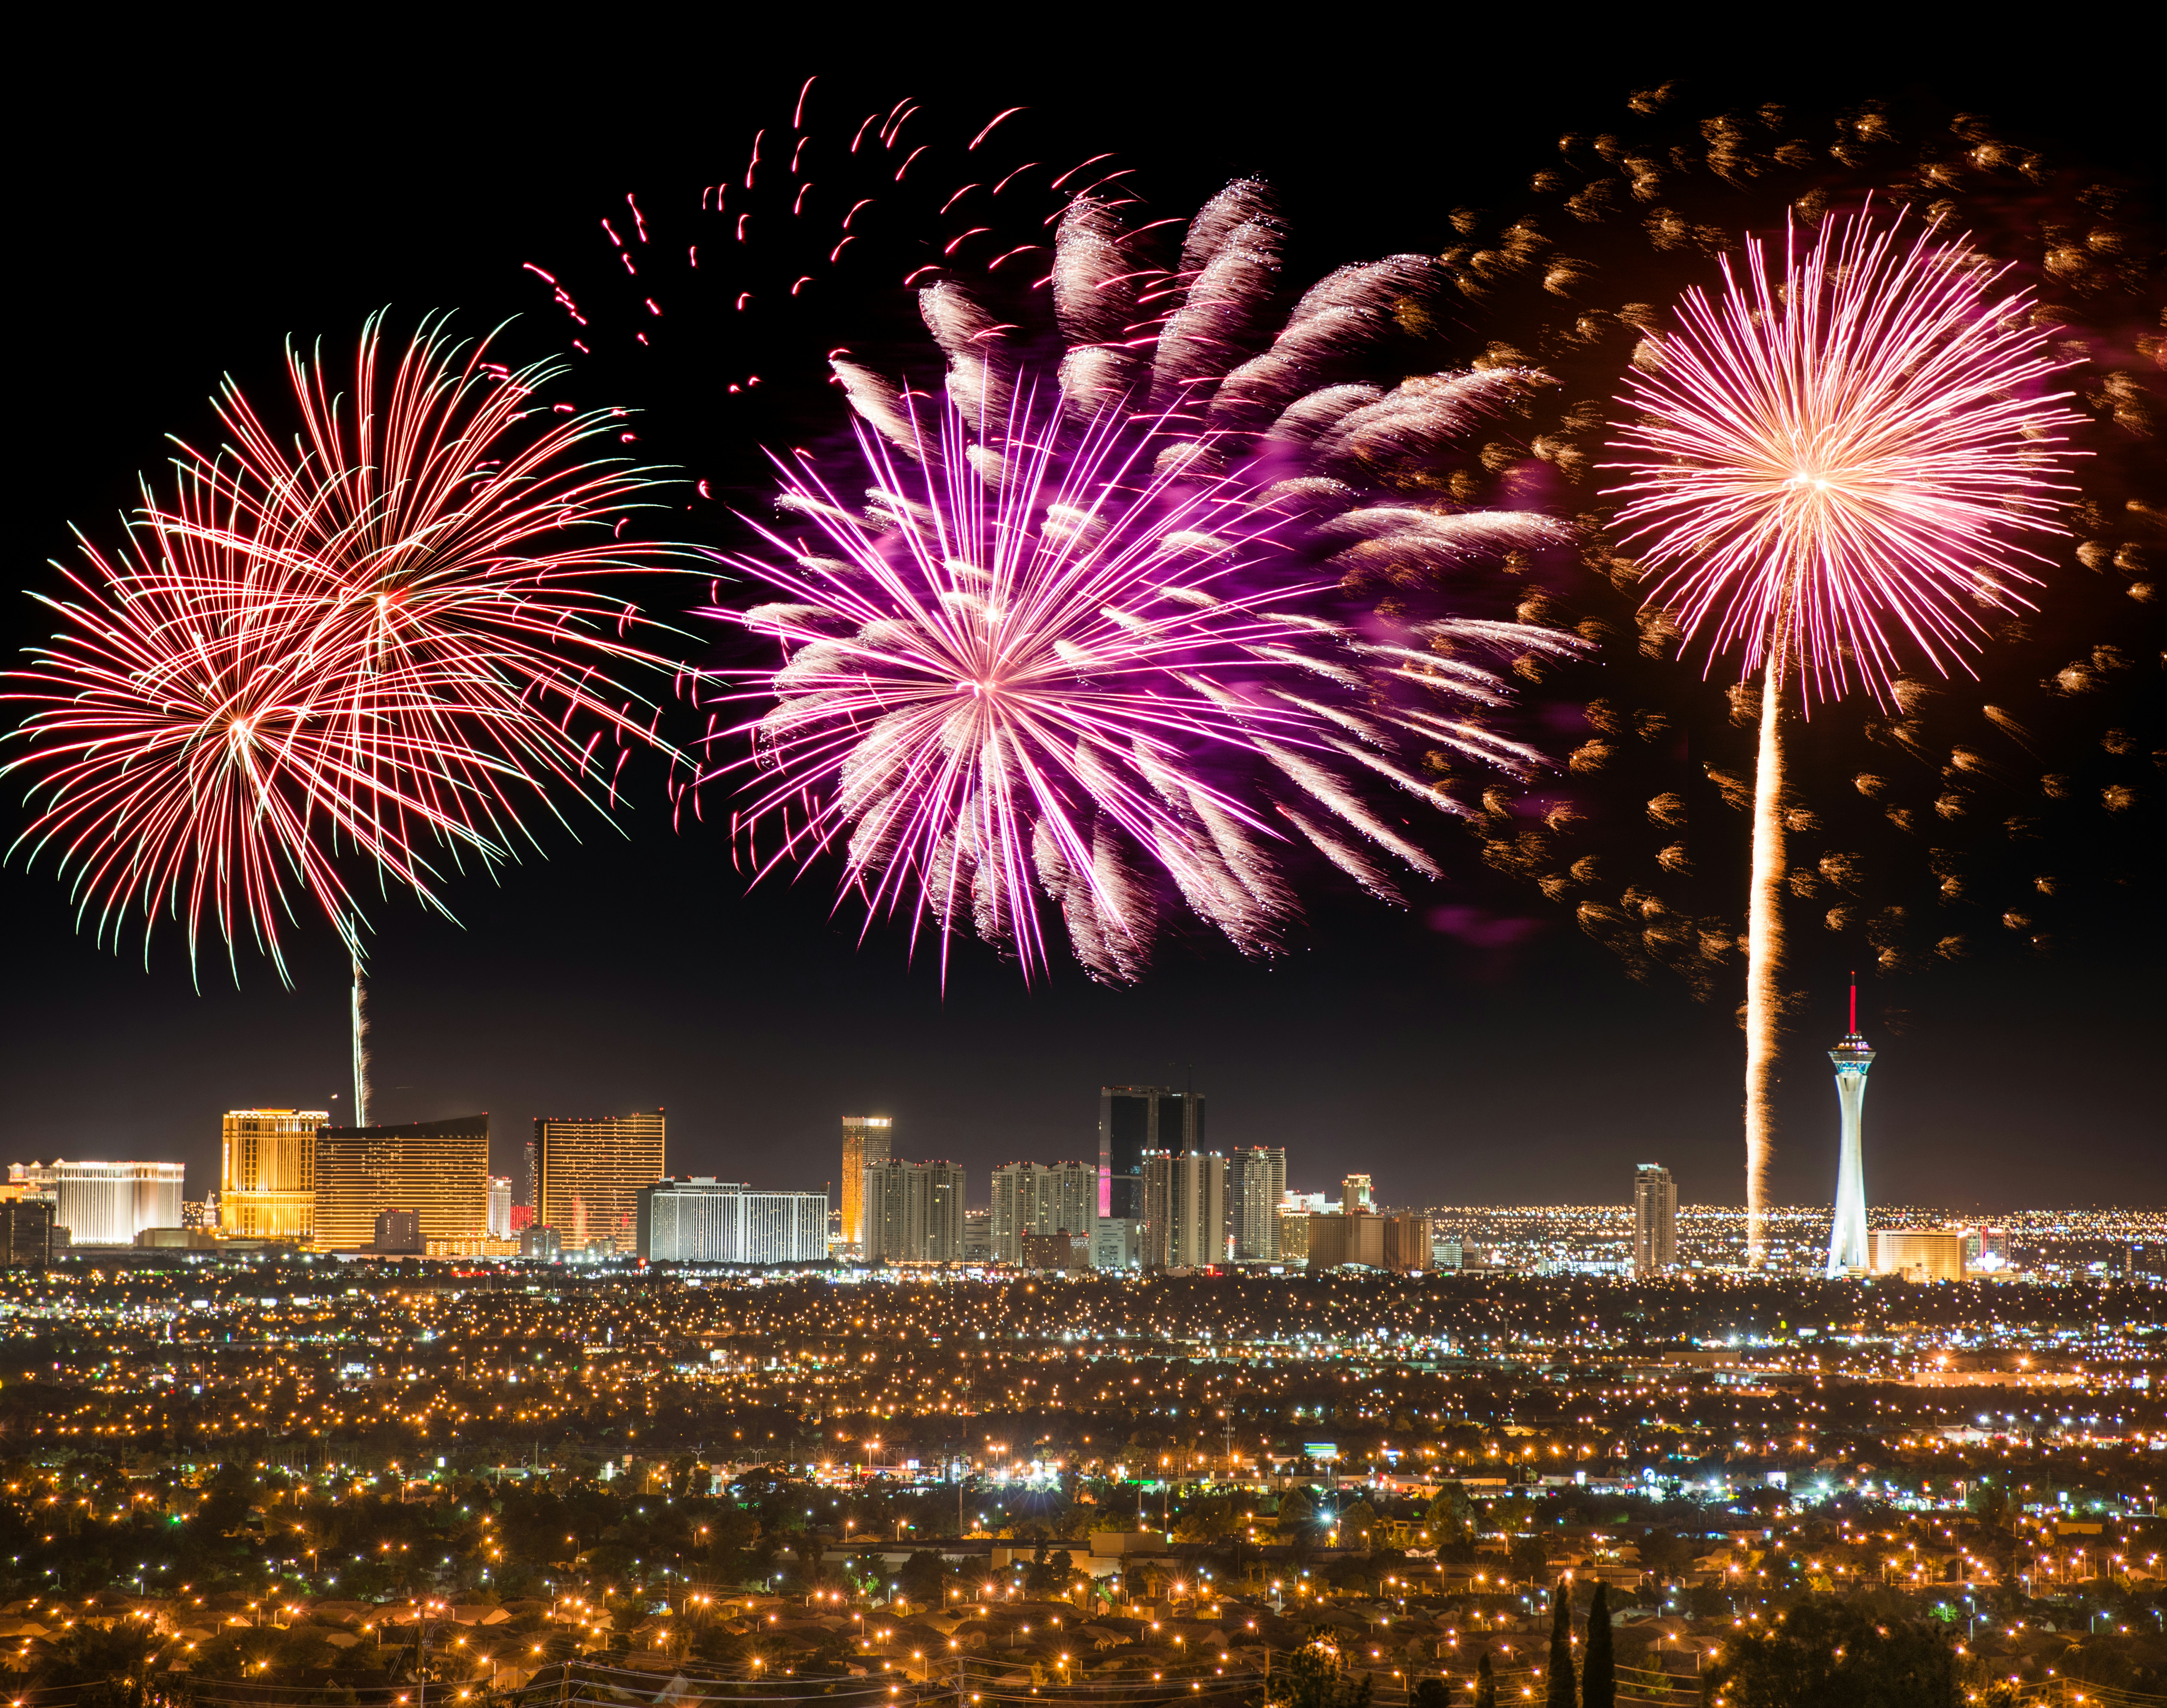 Series of fireworks in Las Vegas for a national holiday